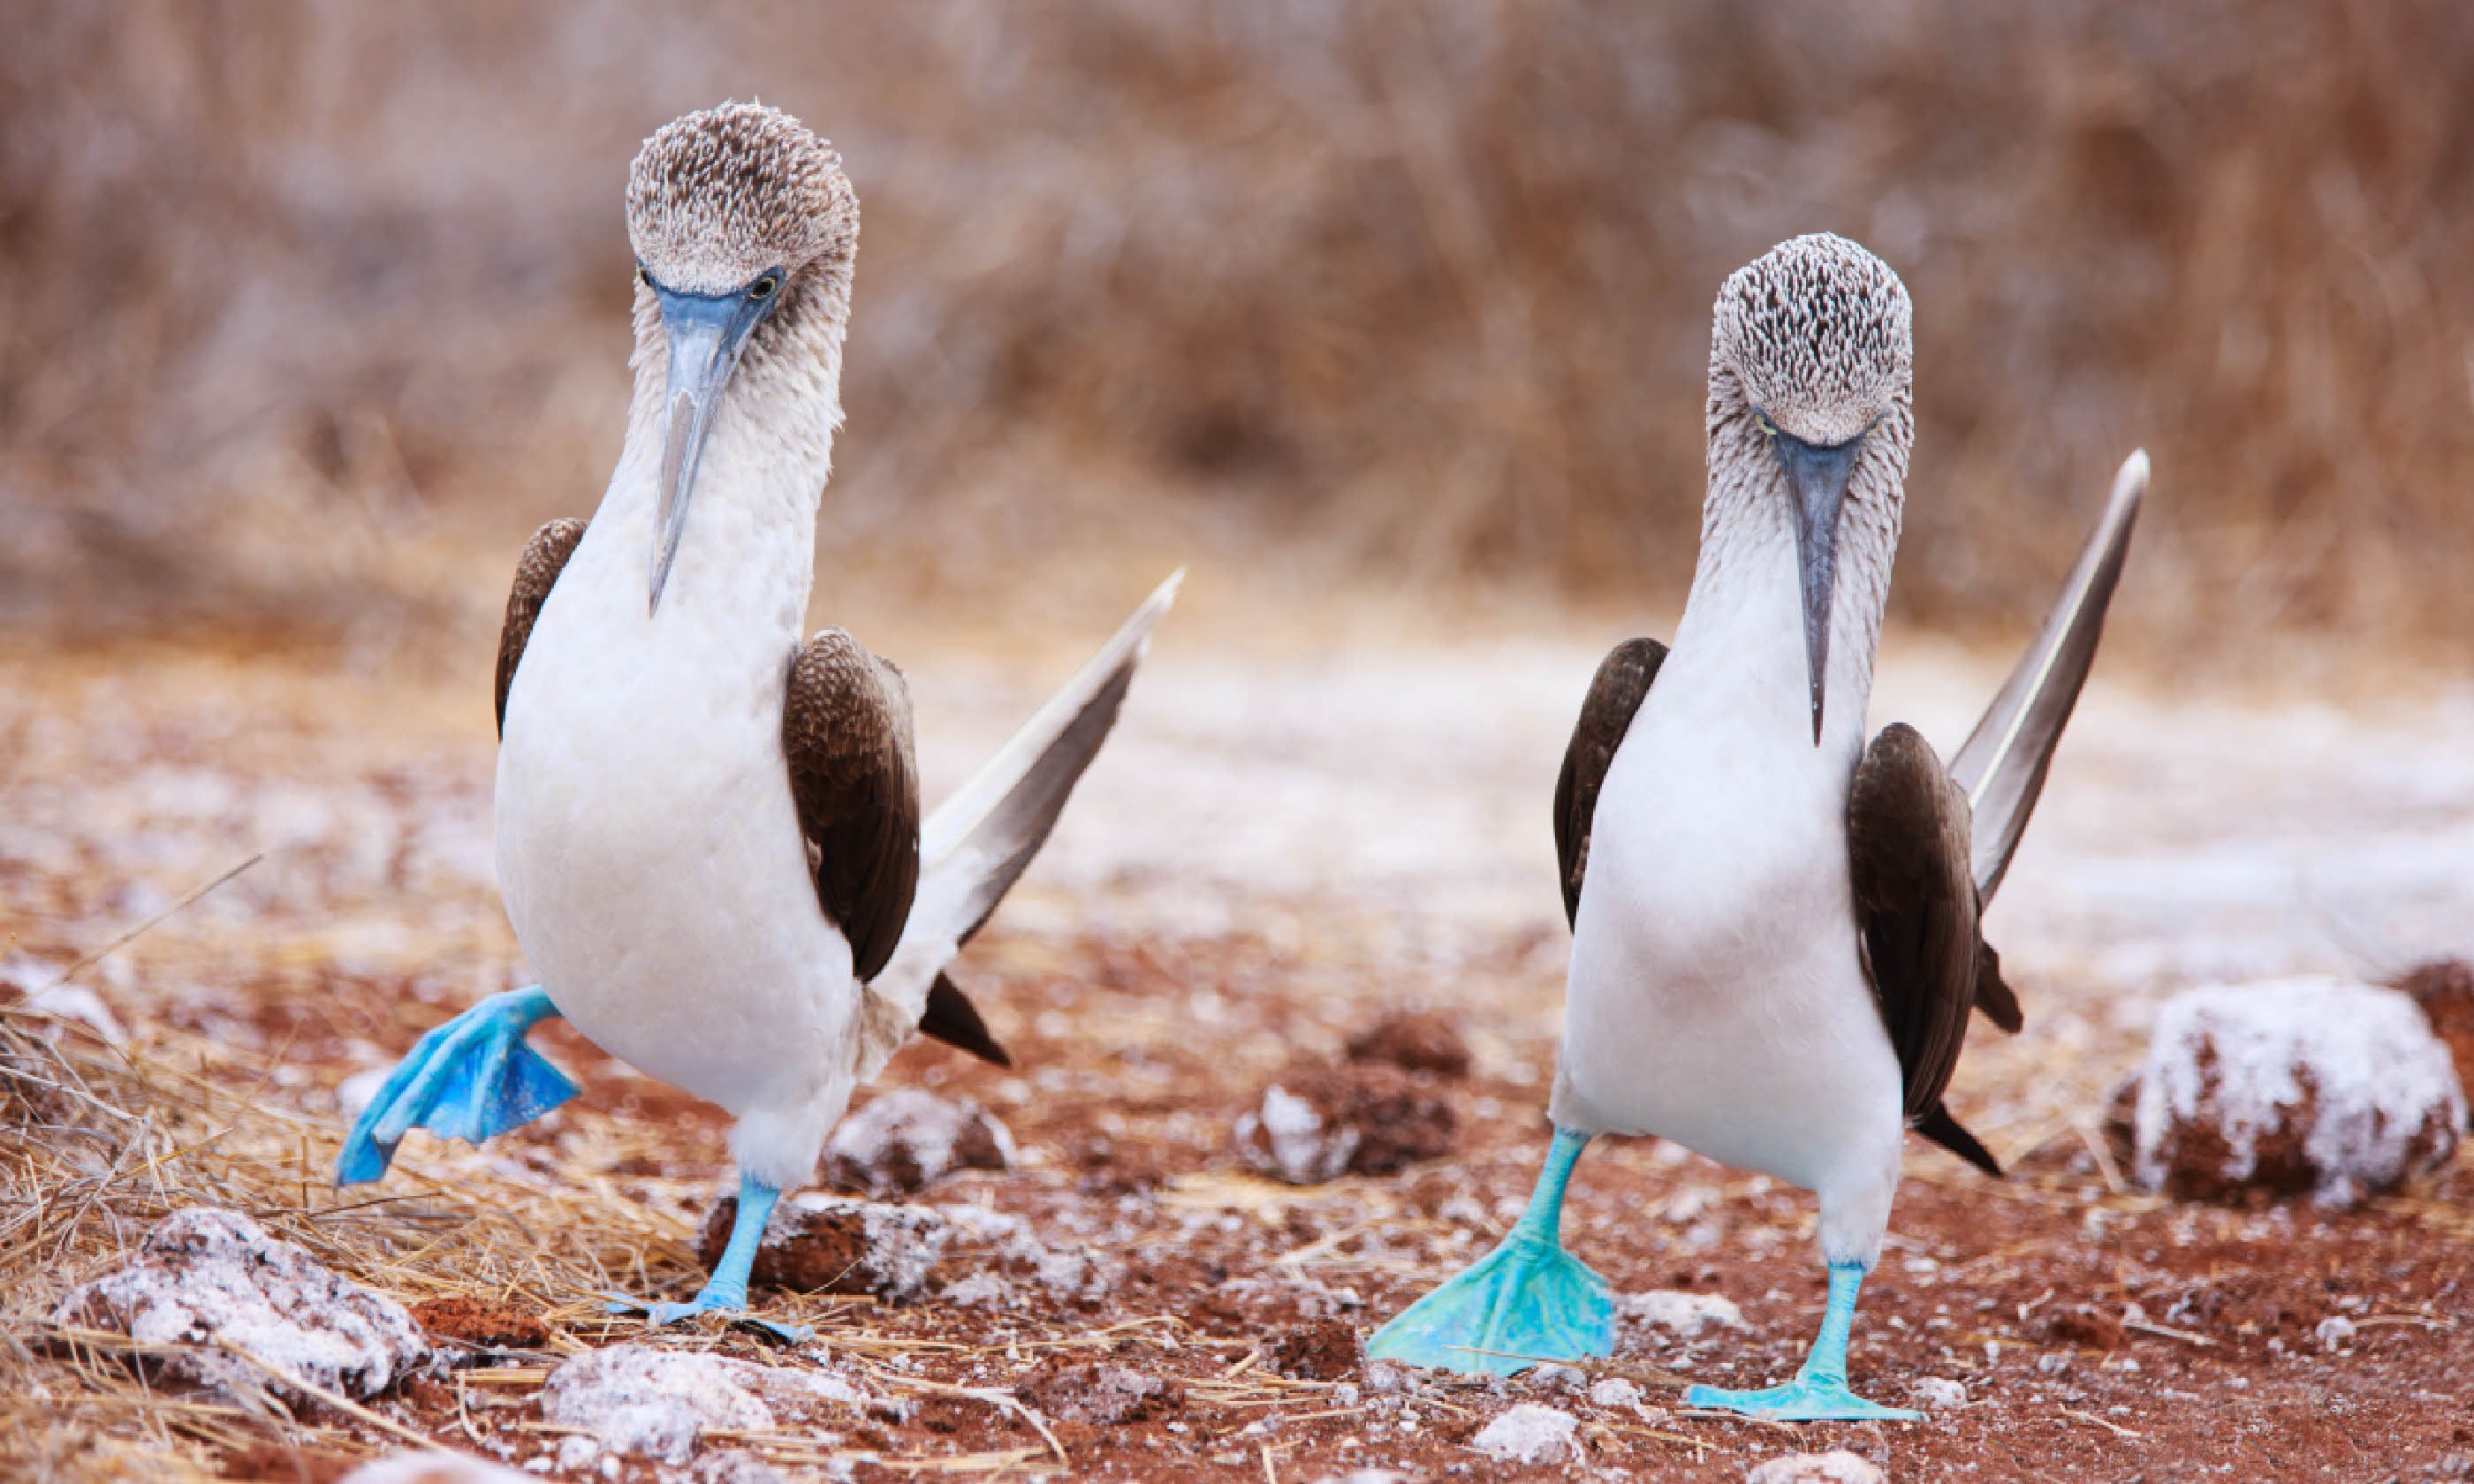 Blue footed boobies performing mating dance (Shutterstock)